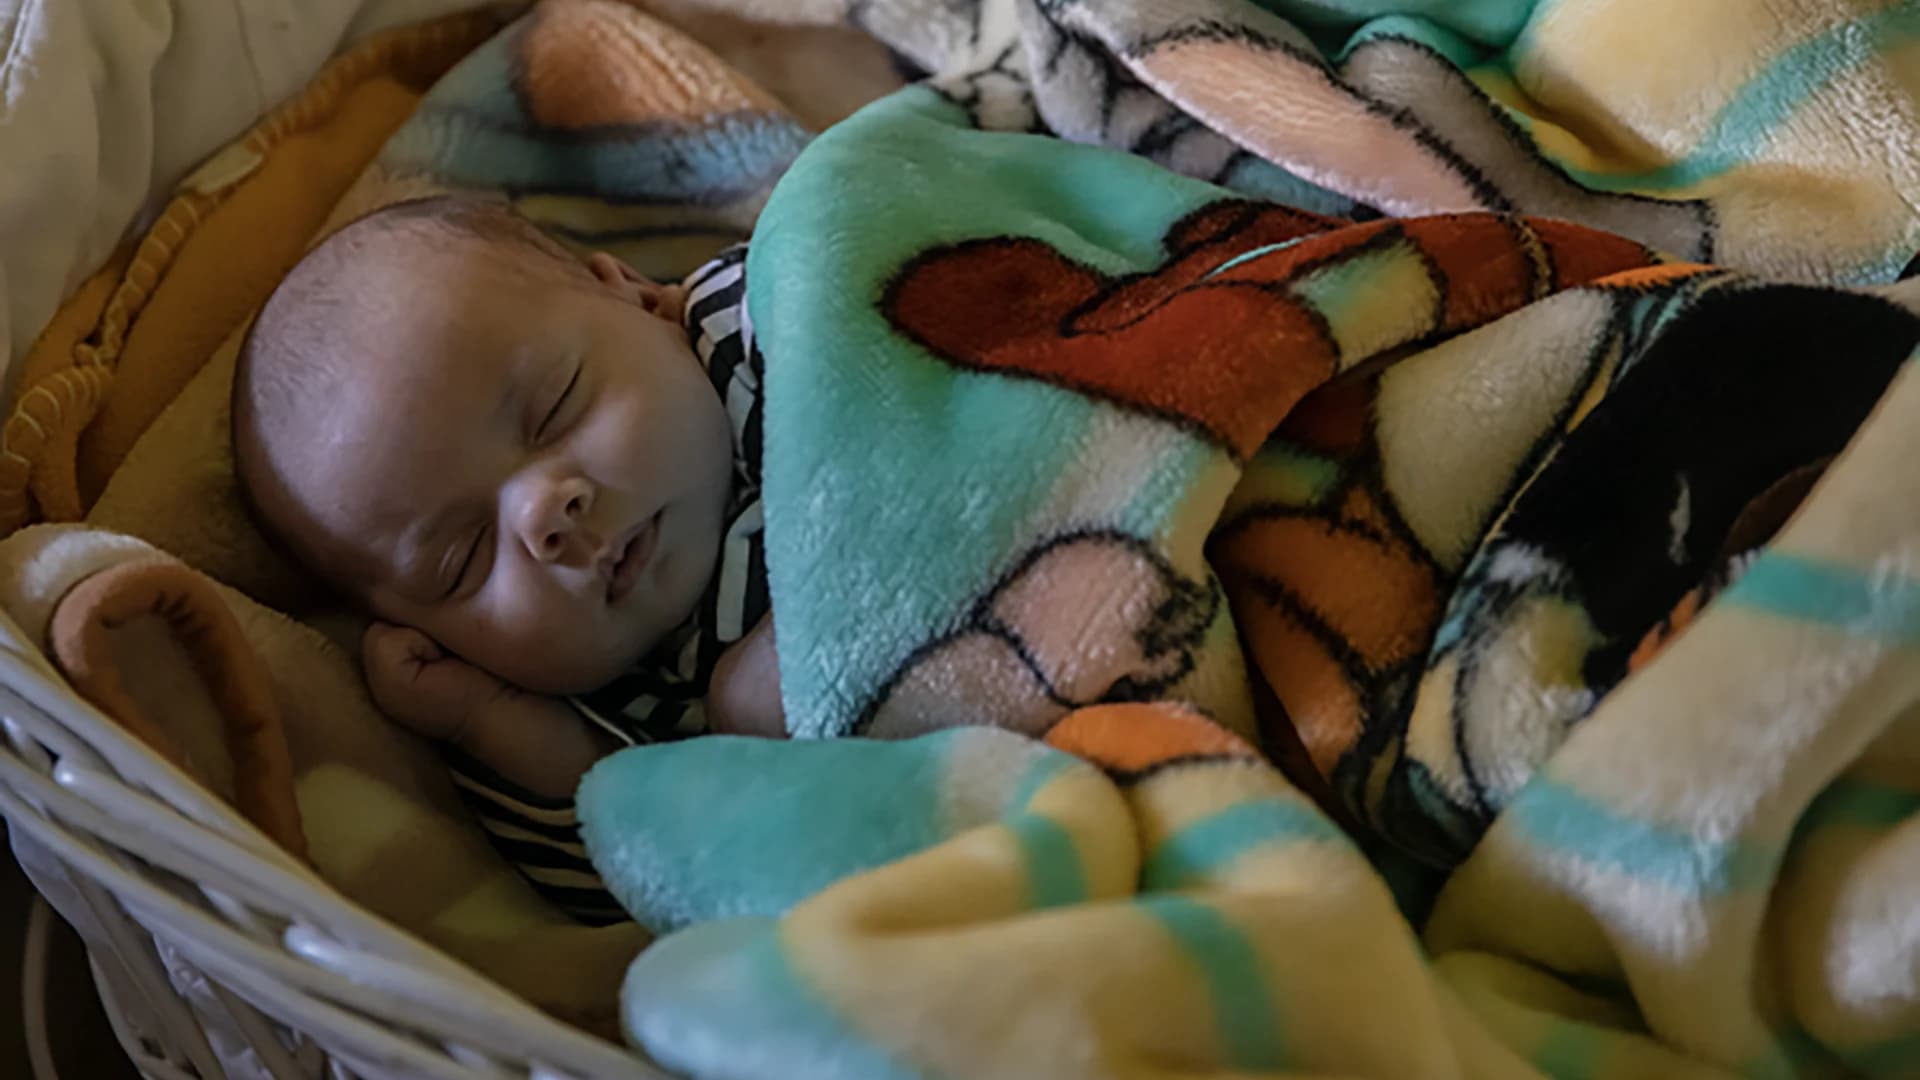 US safety agency approves federal standards for infant sleep products